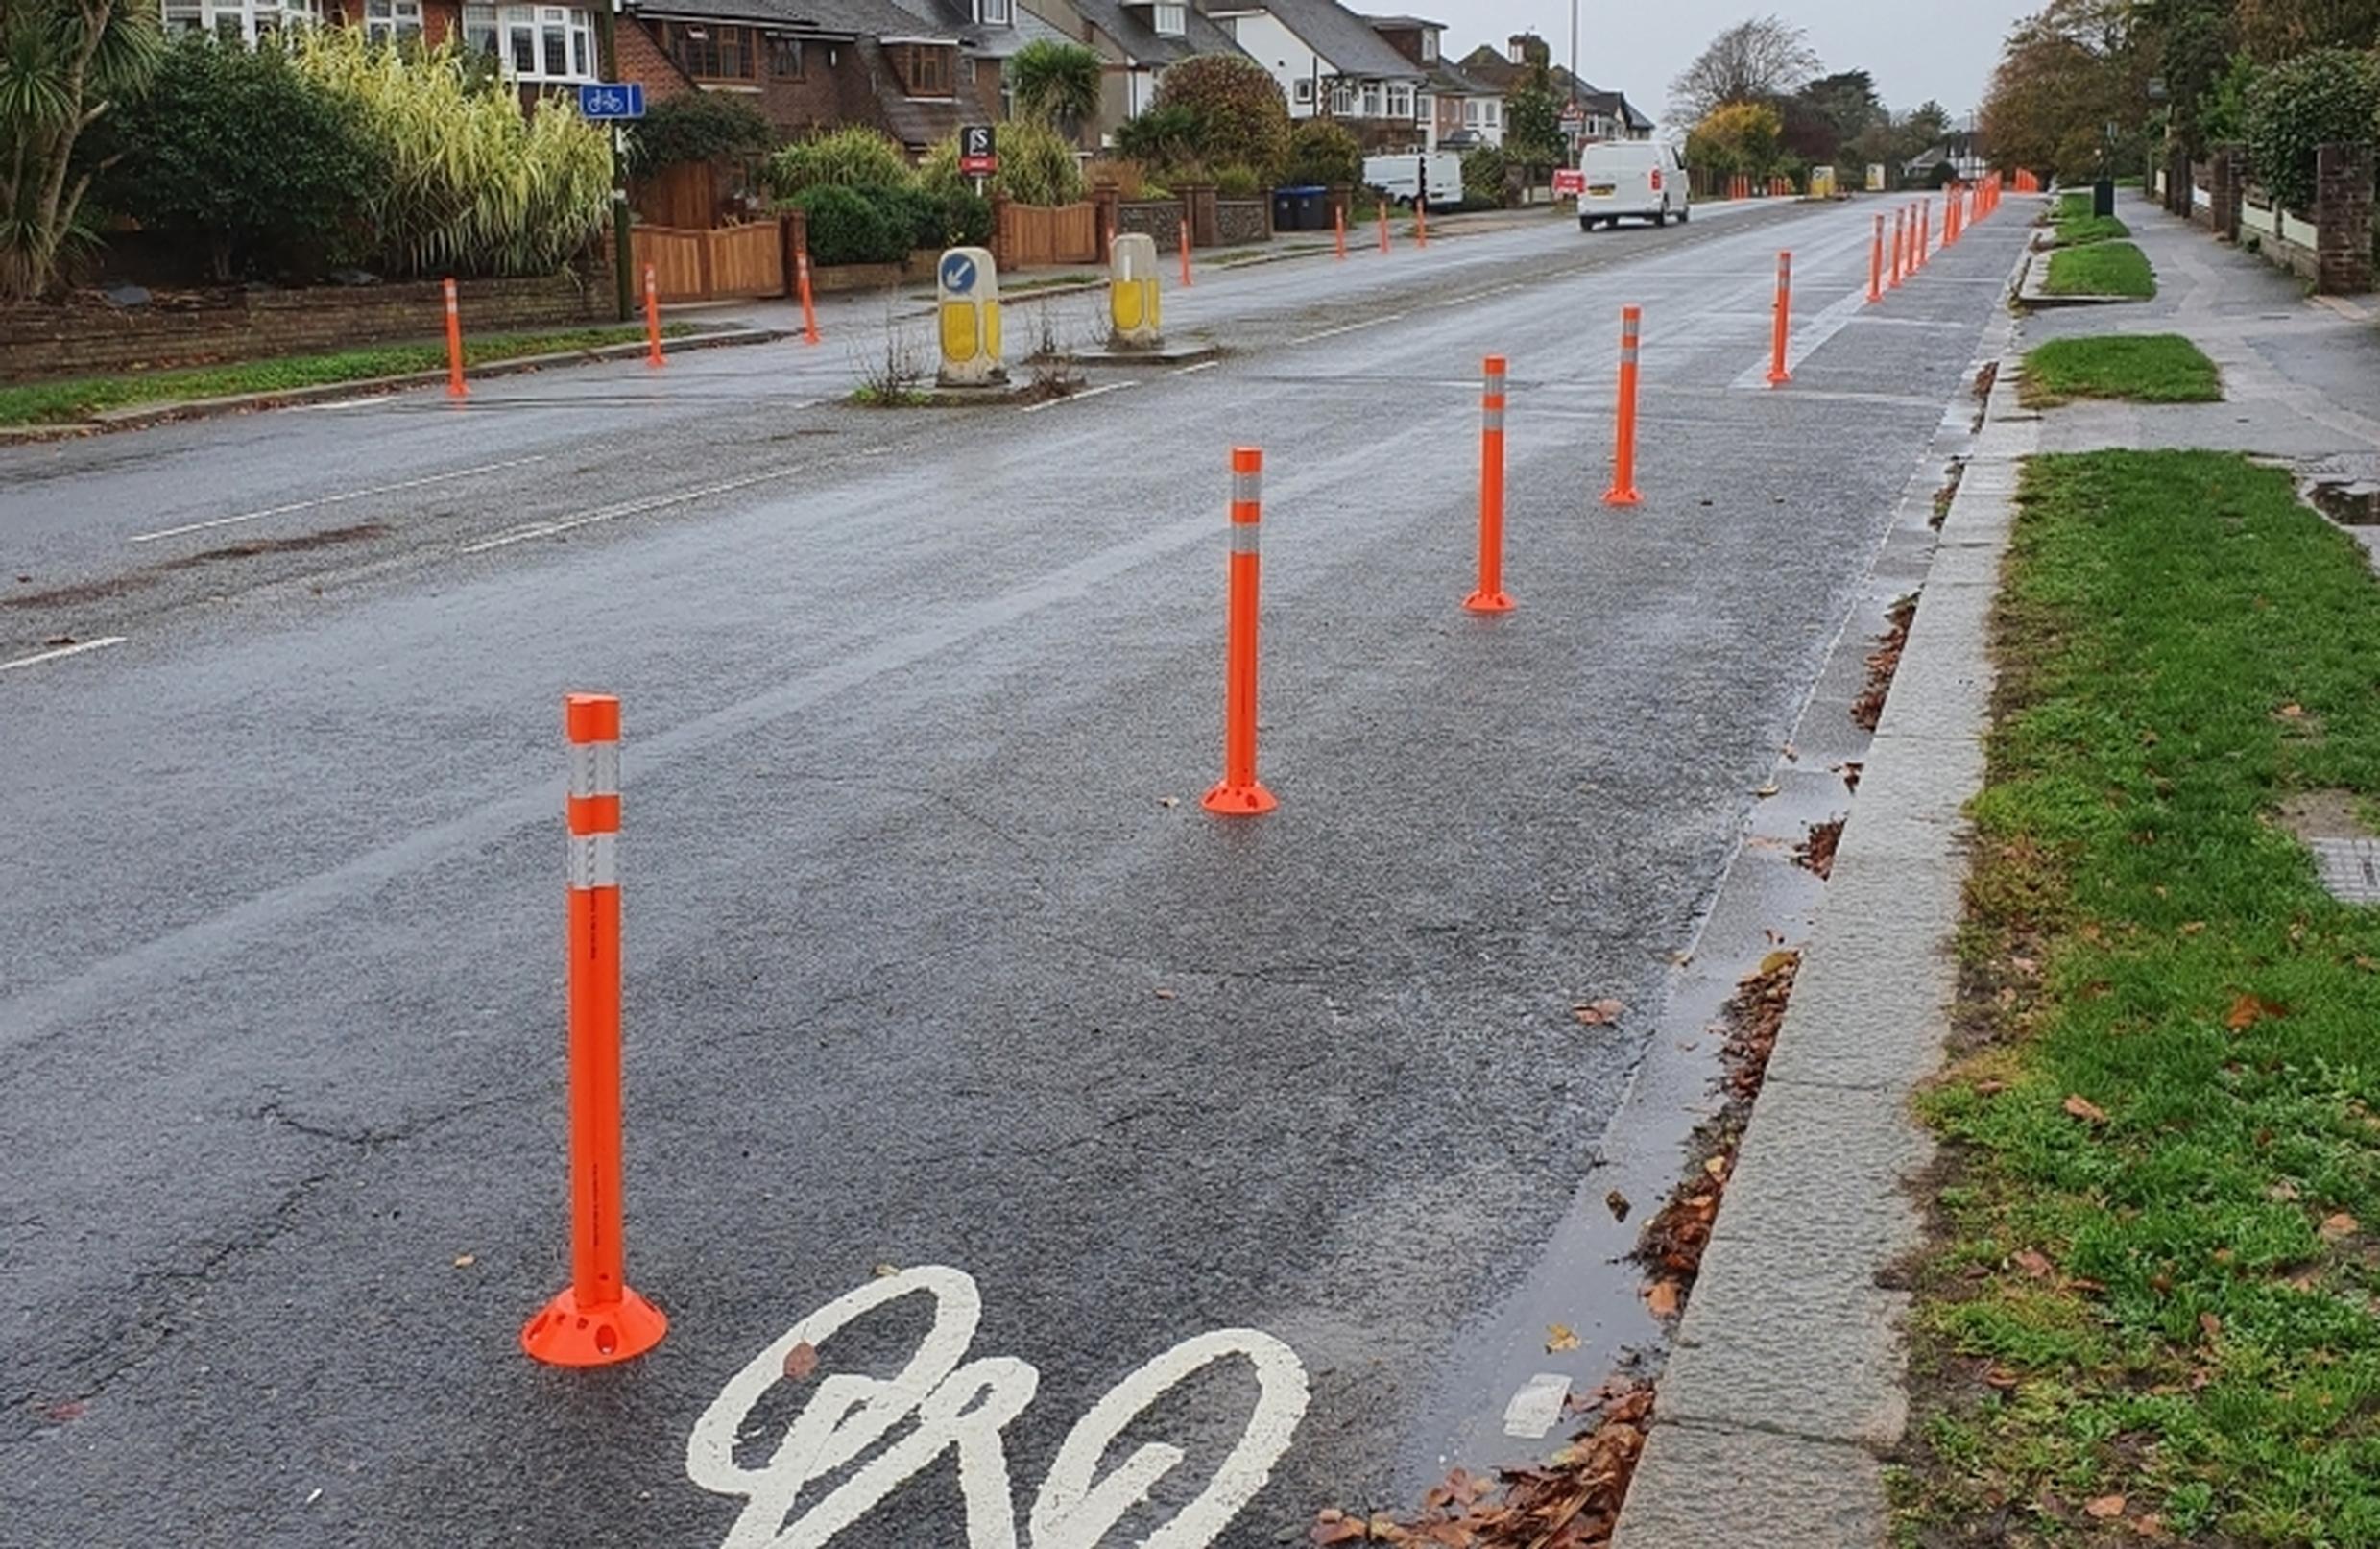 The cycle lanes were removed in January